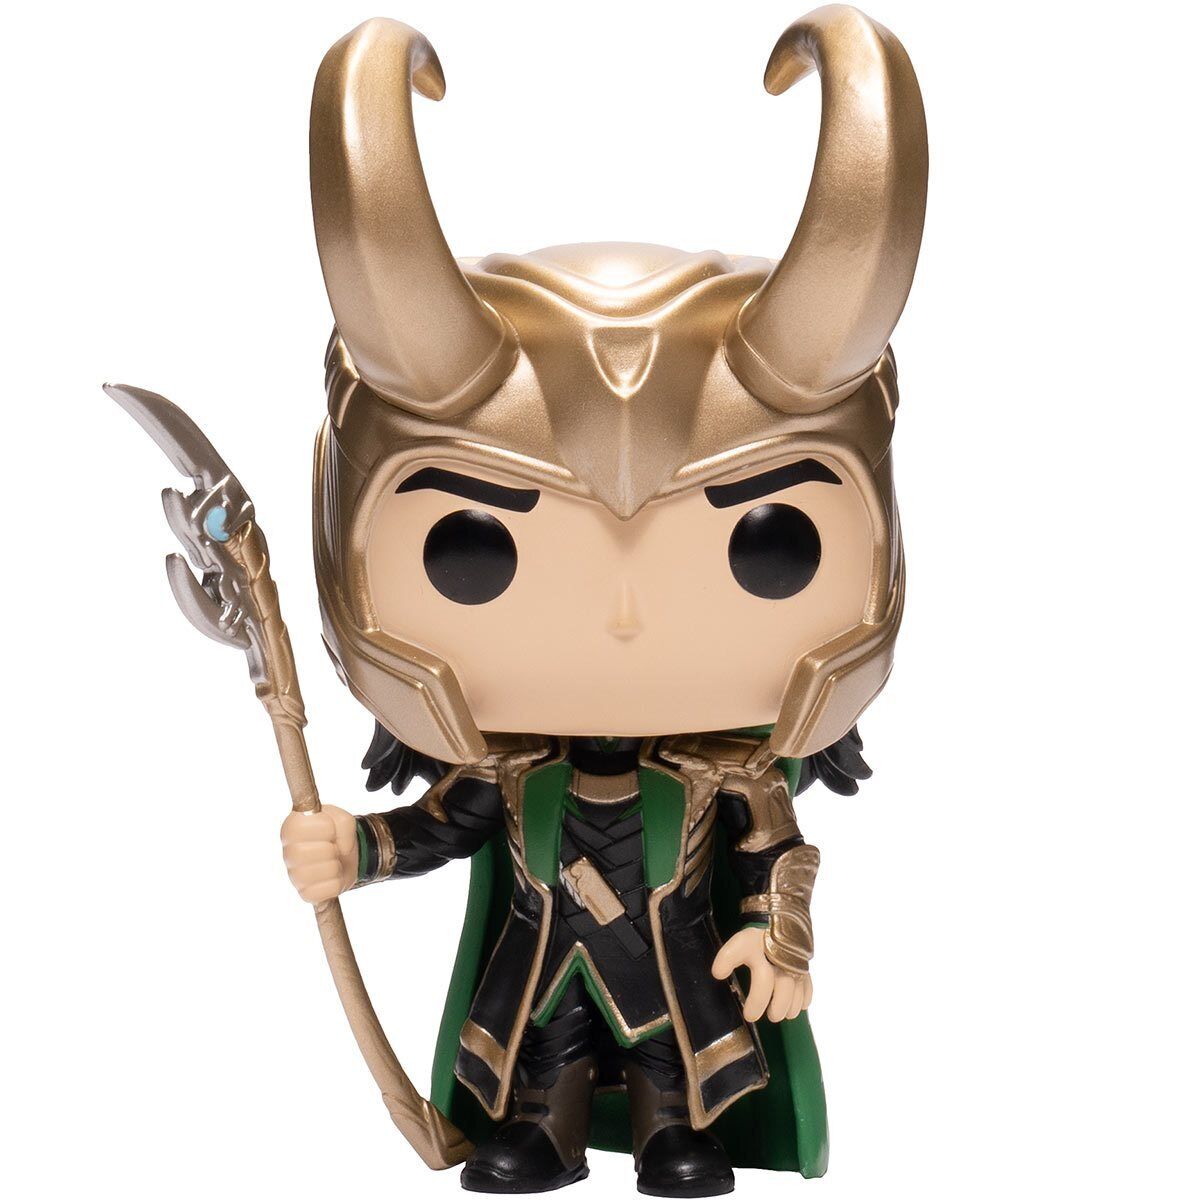 Funko Pop Marvel: Avengers - Loki with Scepter Entertainment Earth Exclusive